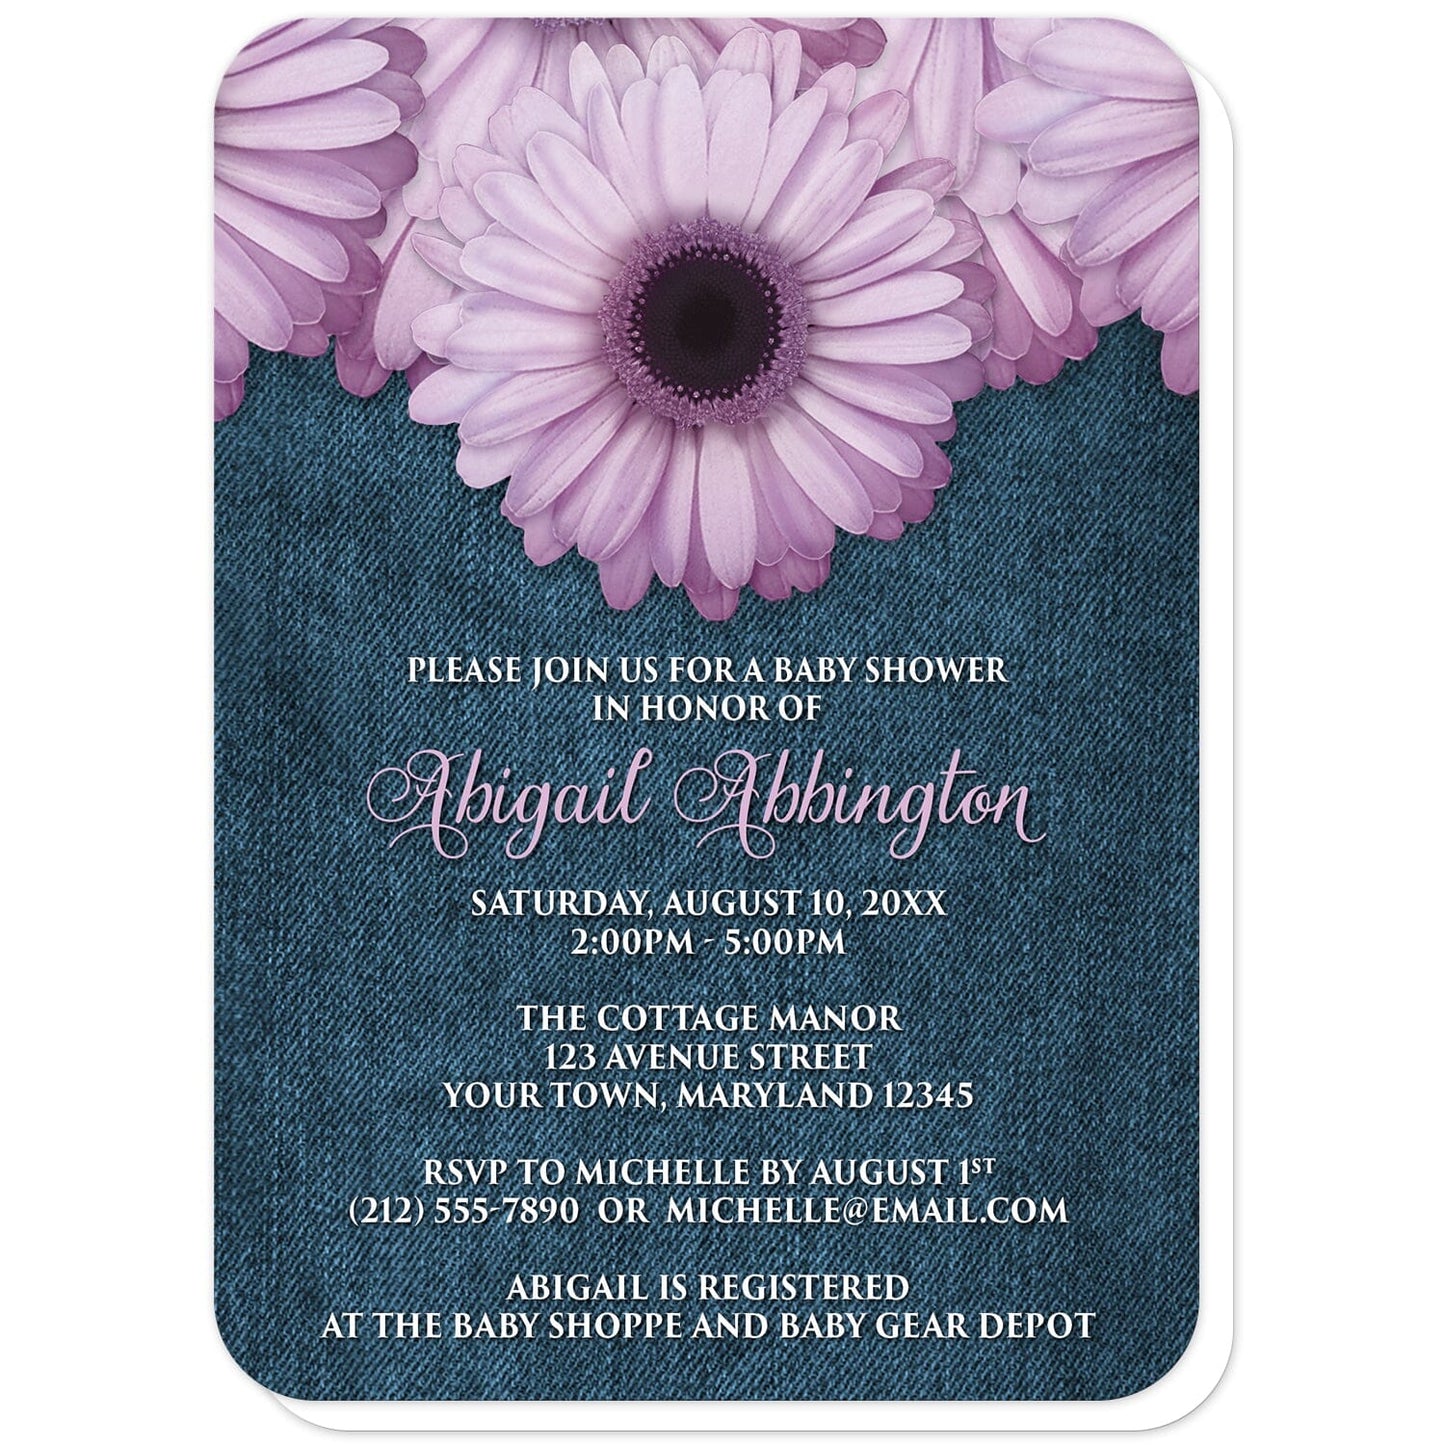 Rustic Purple Daisy Denim Baby Shower Invitations (with rounded corners) at Artistically Invited. Rustic purple daisy denim baby shower invitations designed with large and lovely purple daisy flowers along the top over a country blue denim illustration. Your personalized baby shower celebration details are custom printed in a whimsical purple script font for the name and the remaining details are represented with an all-capital letters white font on the blue denim background. 